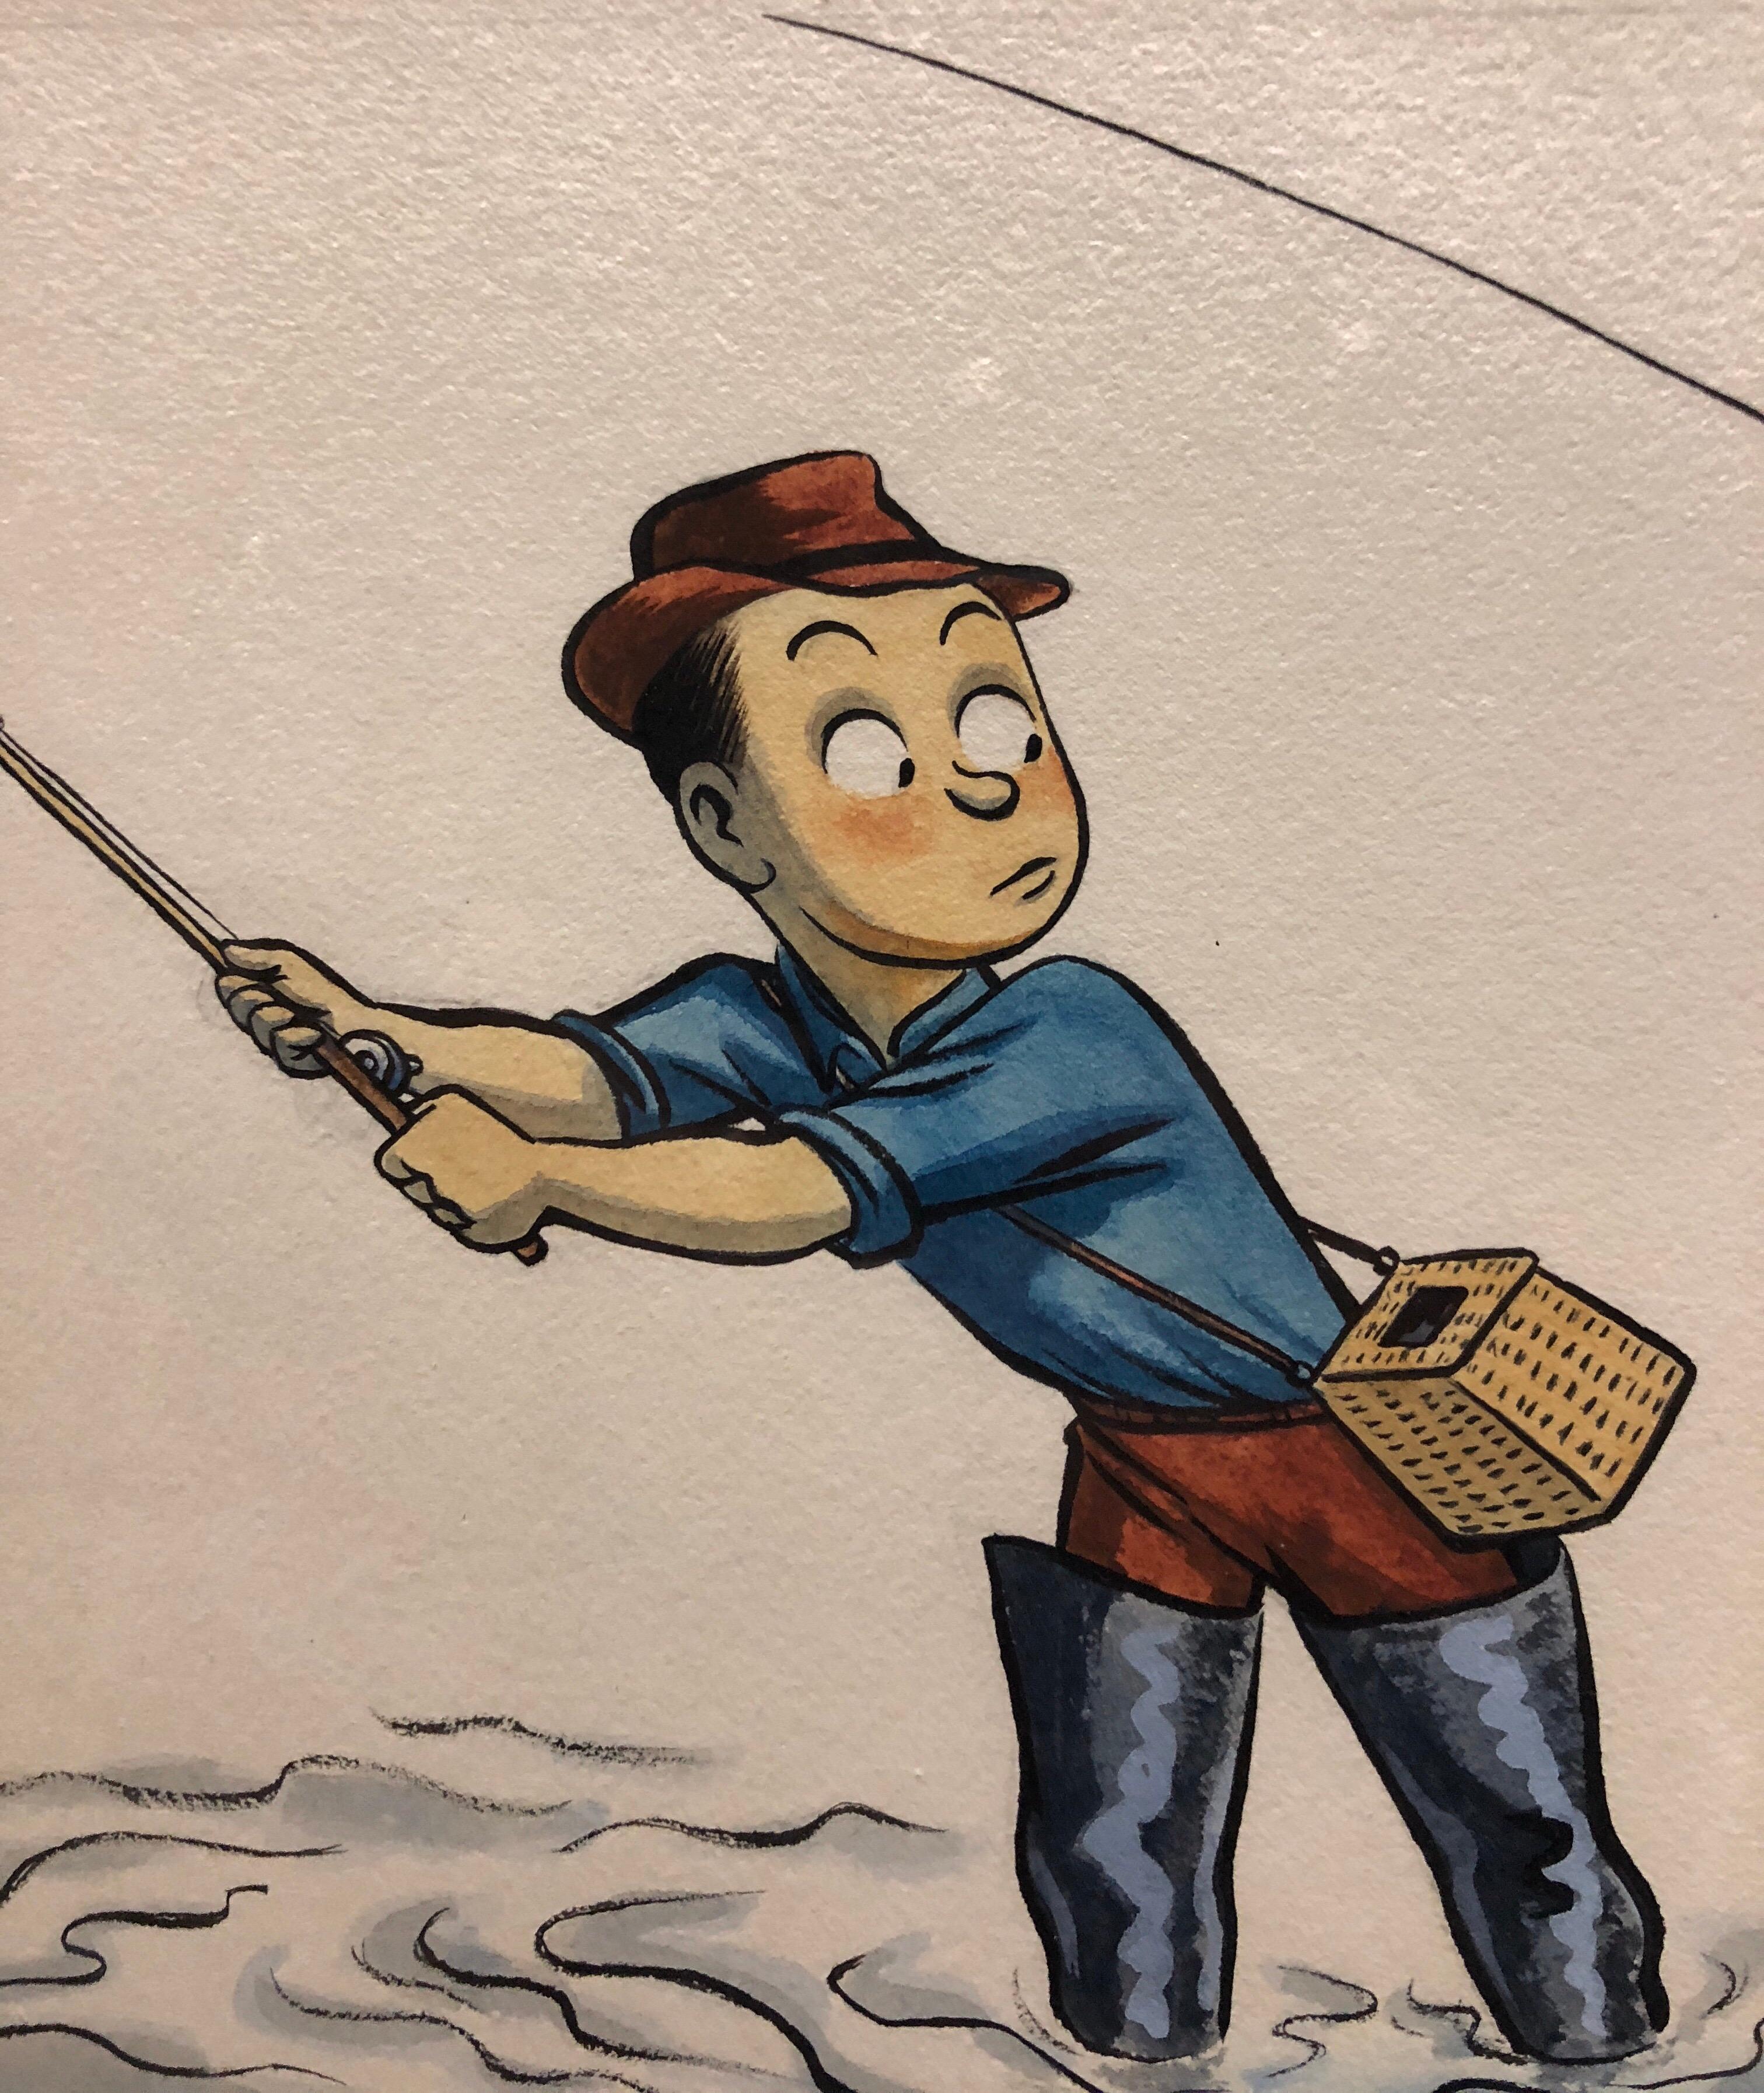 Lighthearted Illustration of Outdoor Pursuits This one of a fisherman signed 